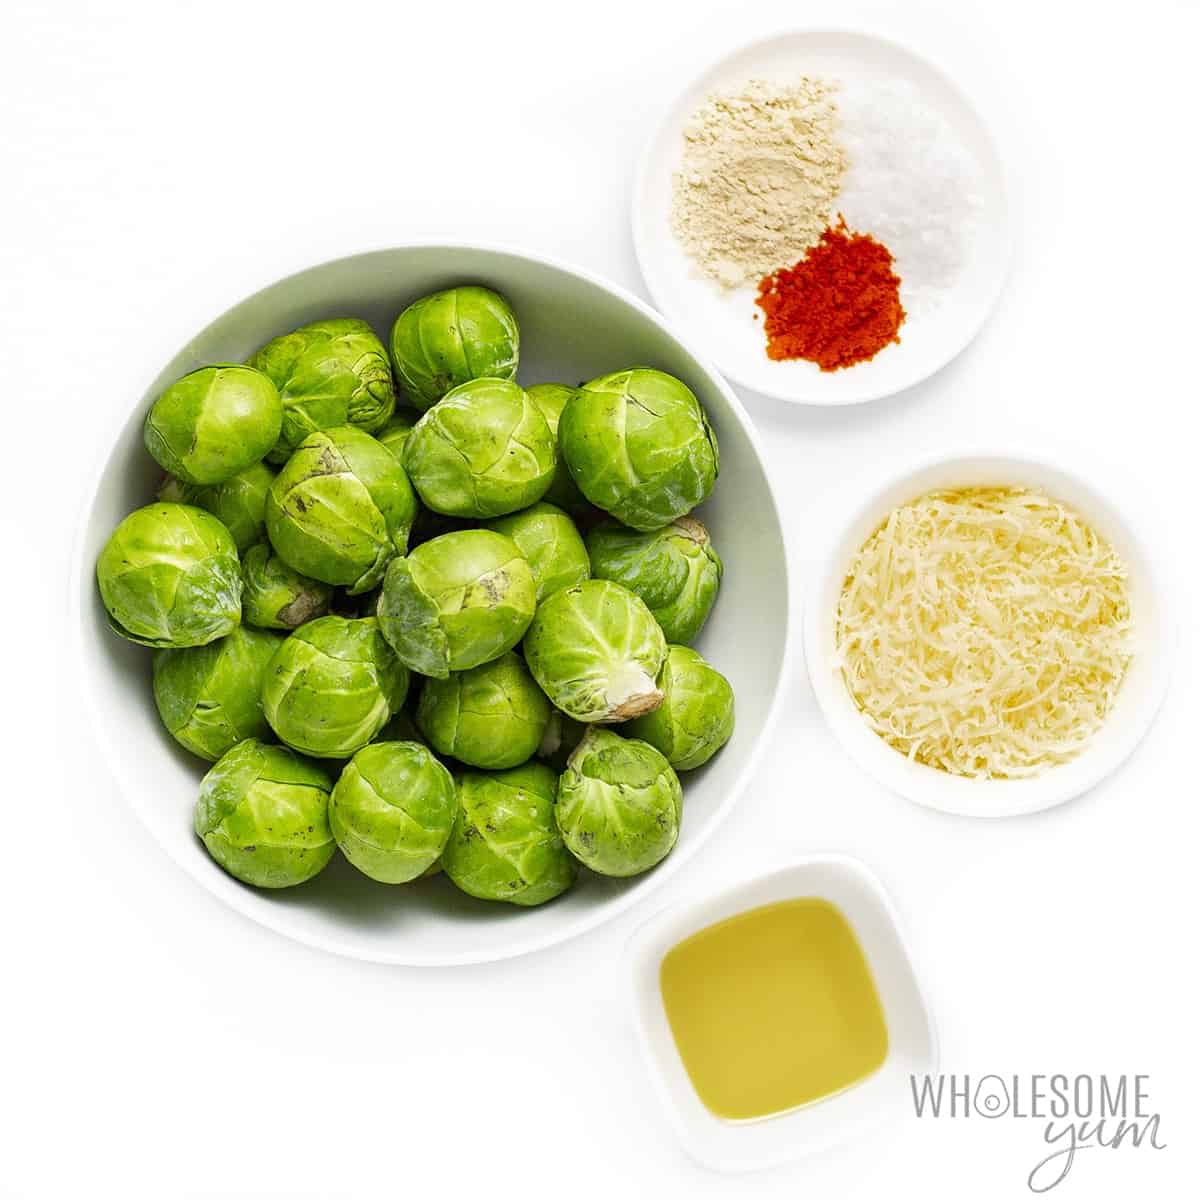 Smashed brussels sprouts recipe ingredients in bowls